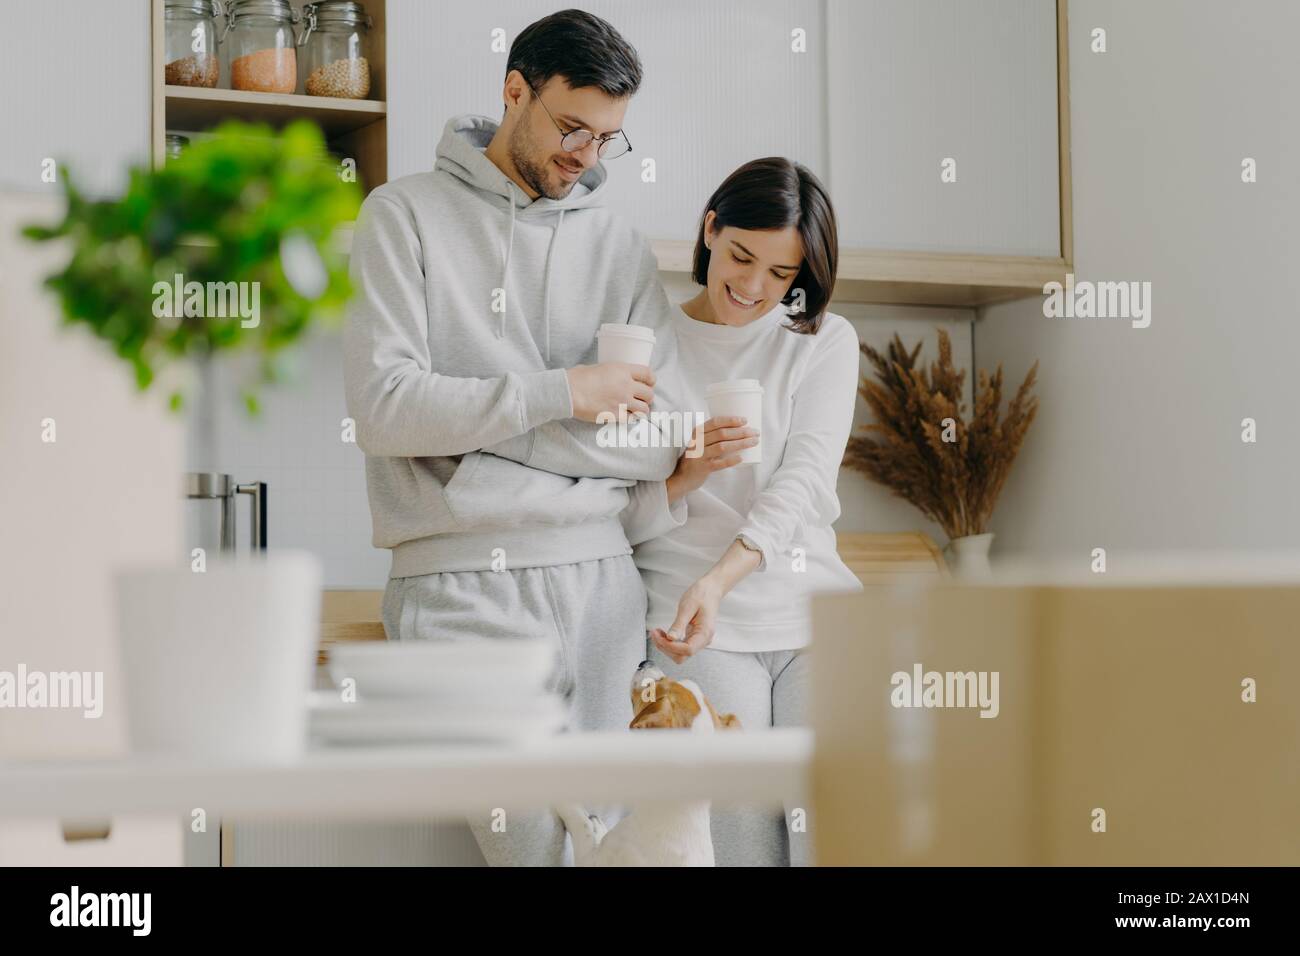 Horizontal view of happy young woman and man play with dog, drink takeaway coffee, stand against kitchen interior, unpack boxes with personal stuff, w Stock Photo